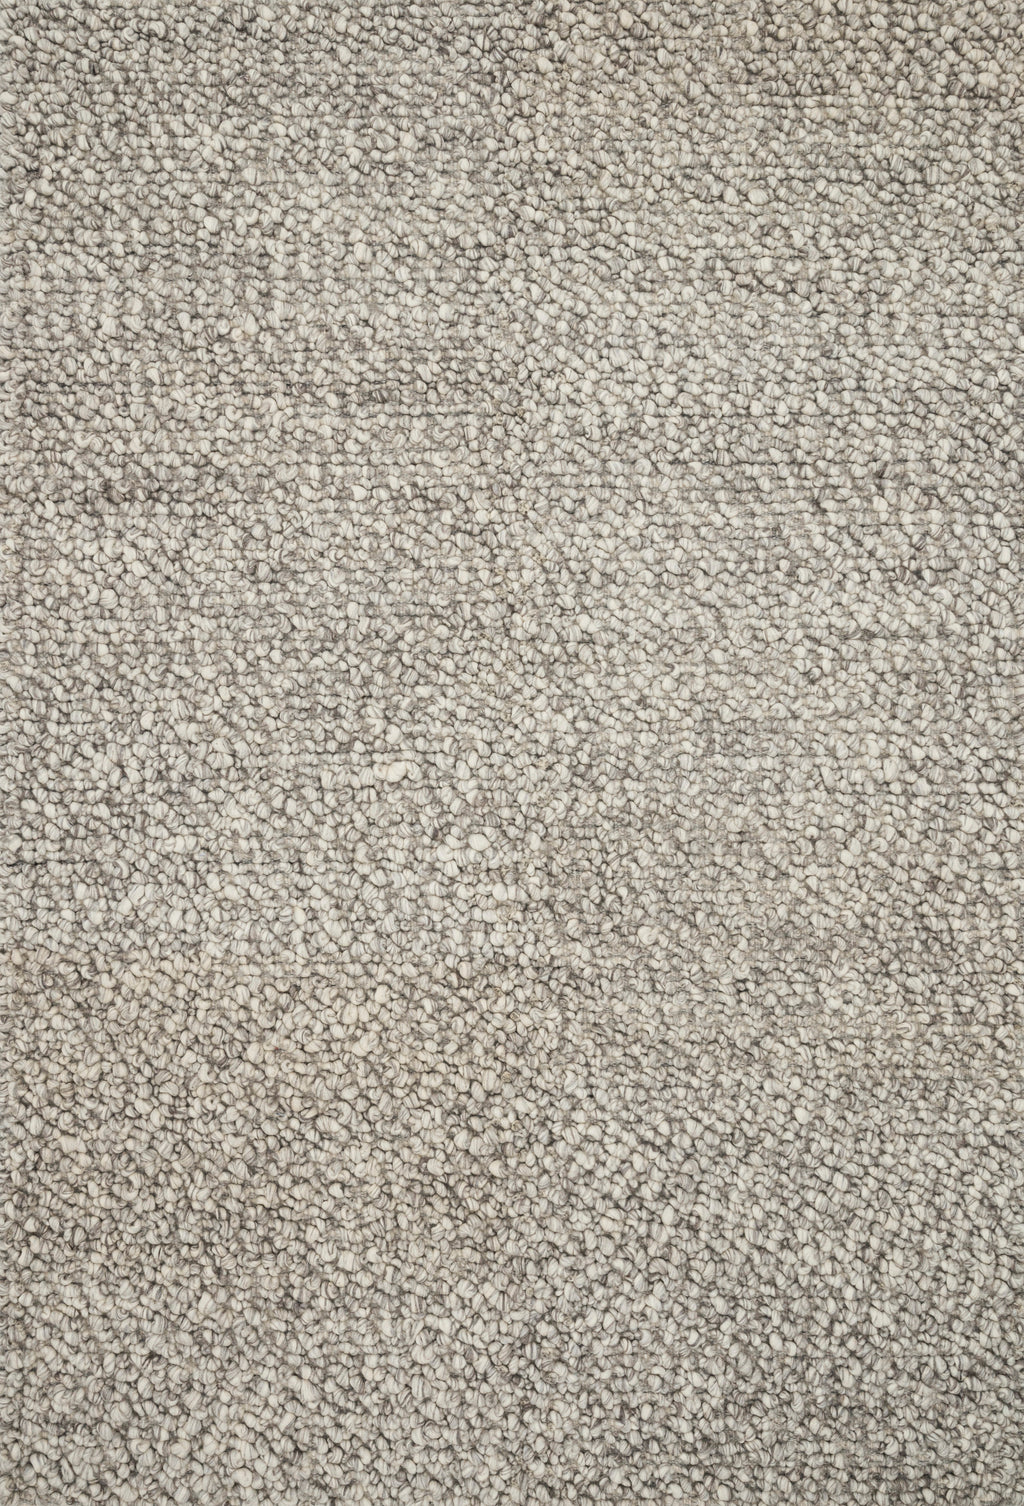 QUARRY Collection Wool Rug  in  STONE Gray Accent Hand-Woven Wool